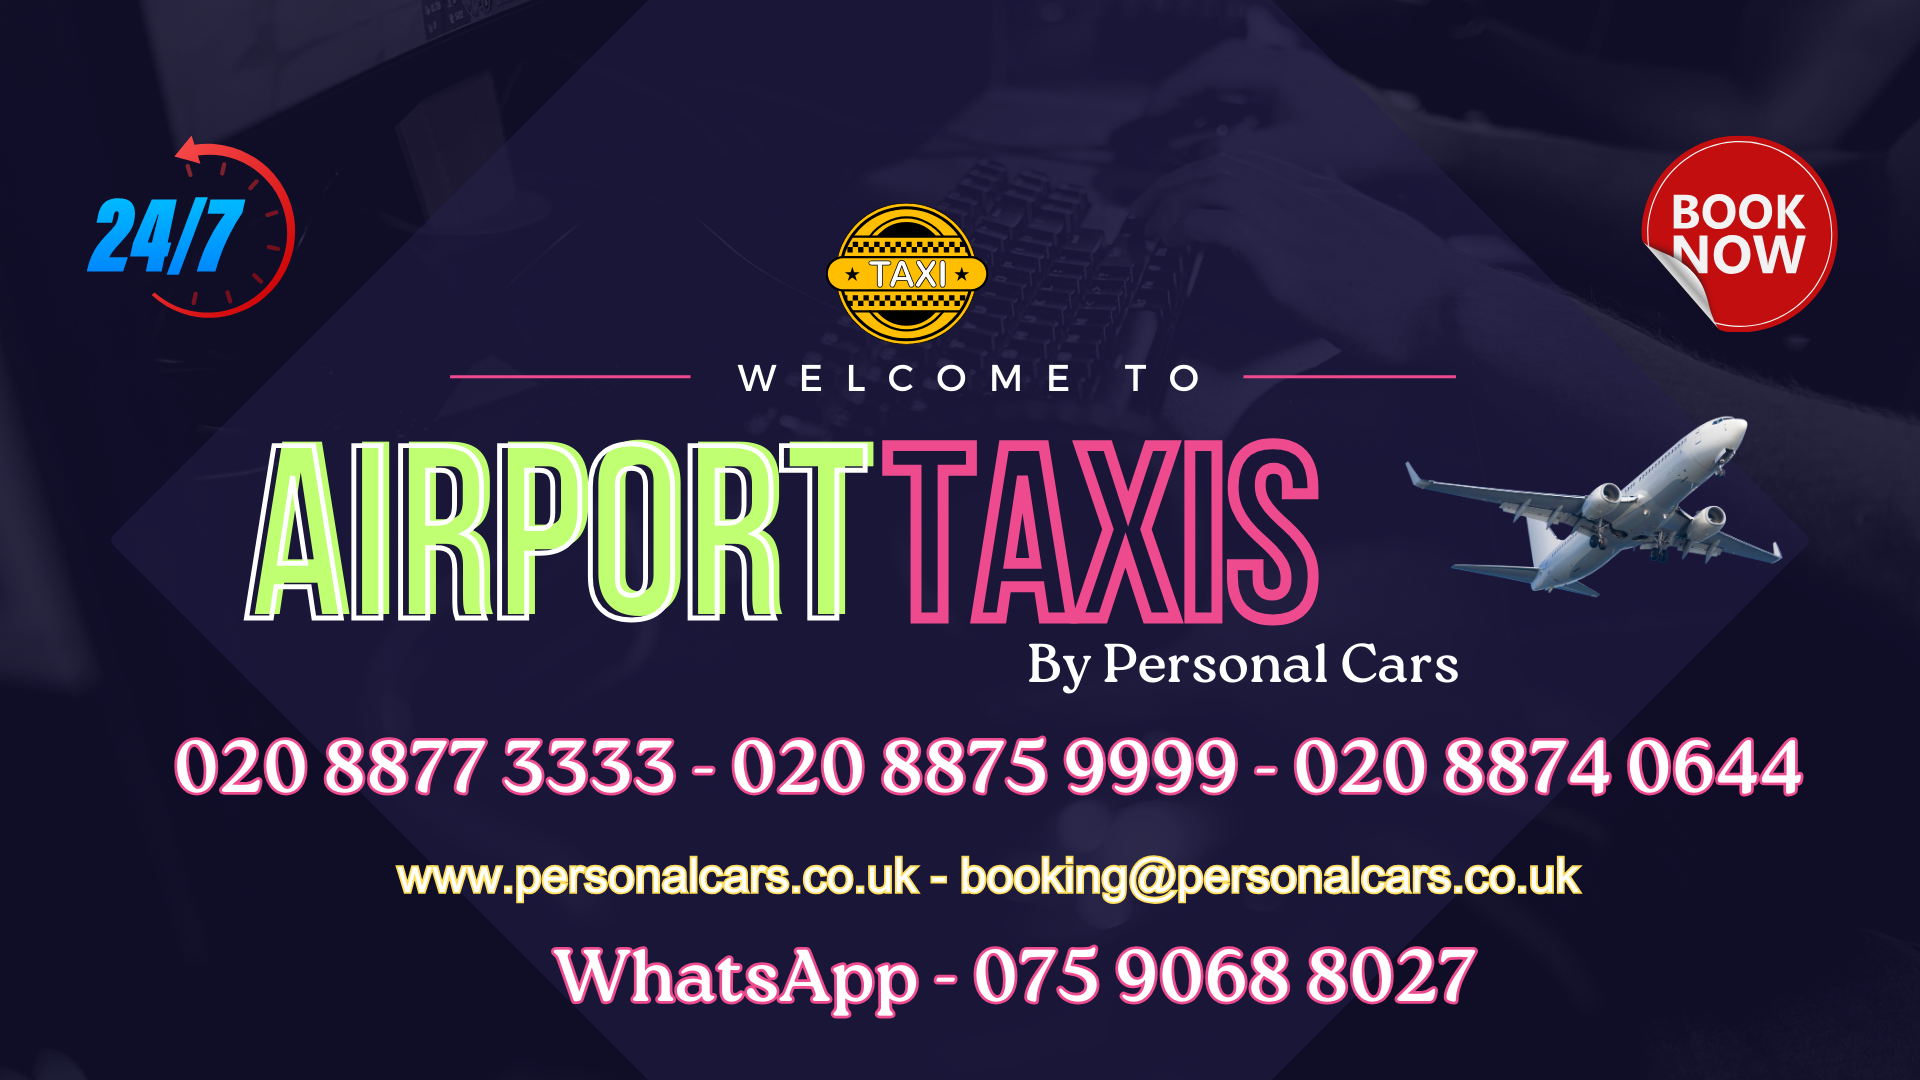 Airport taxis by personal cars